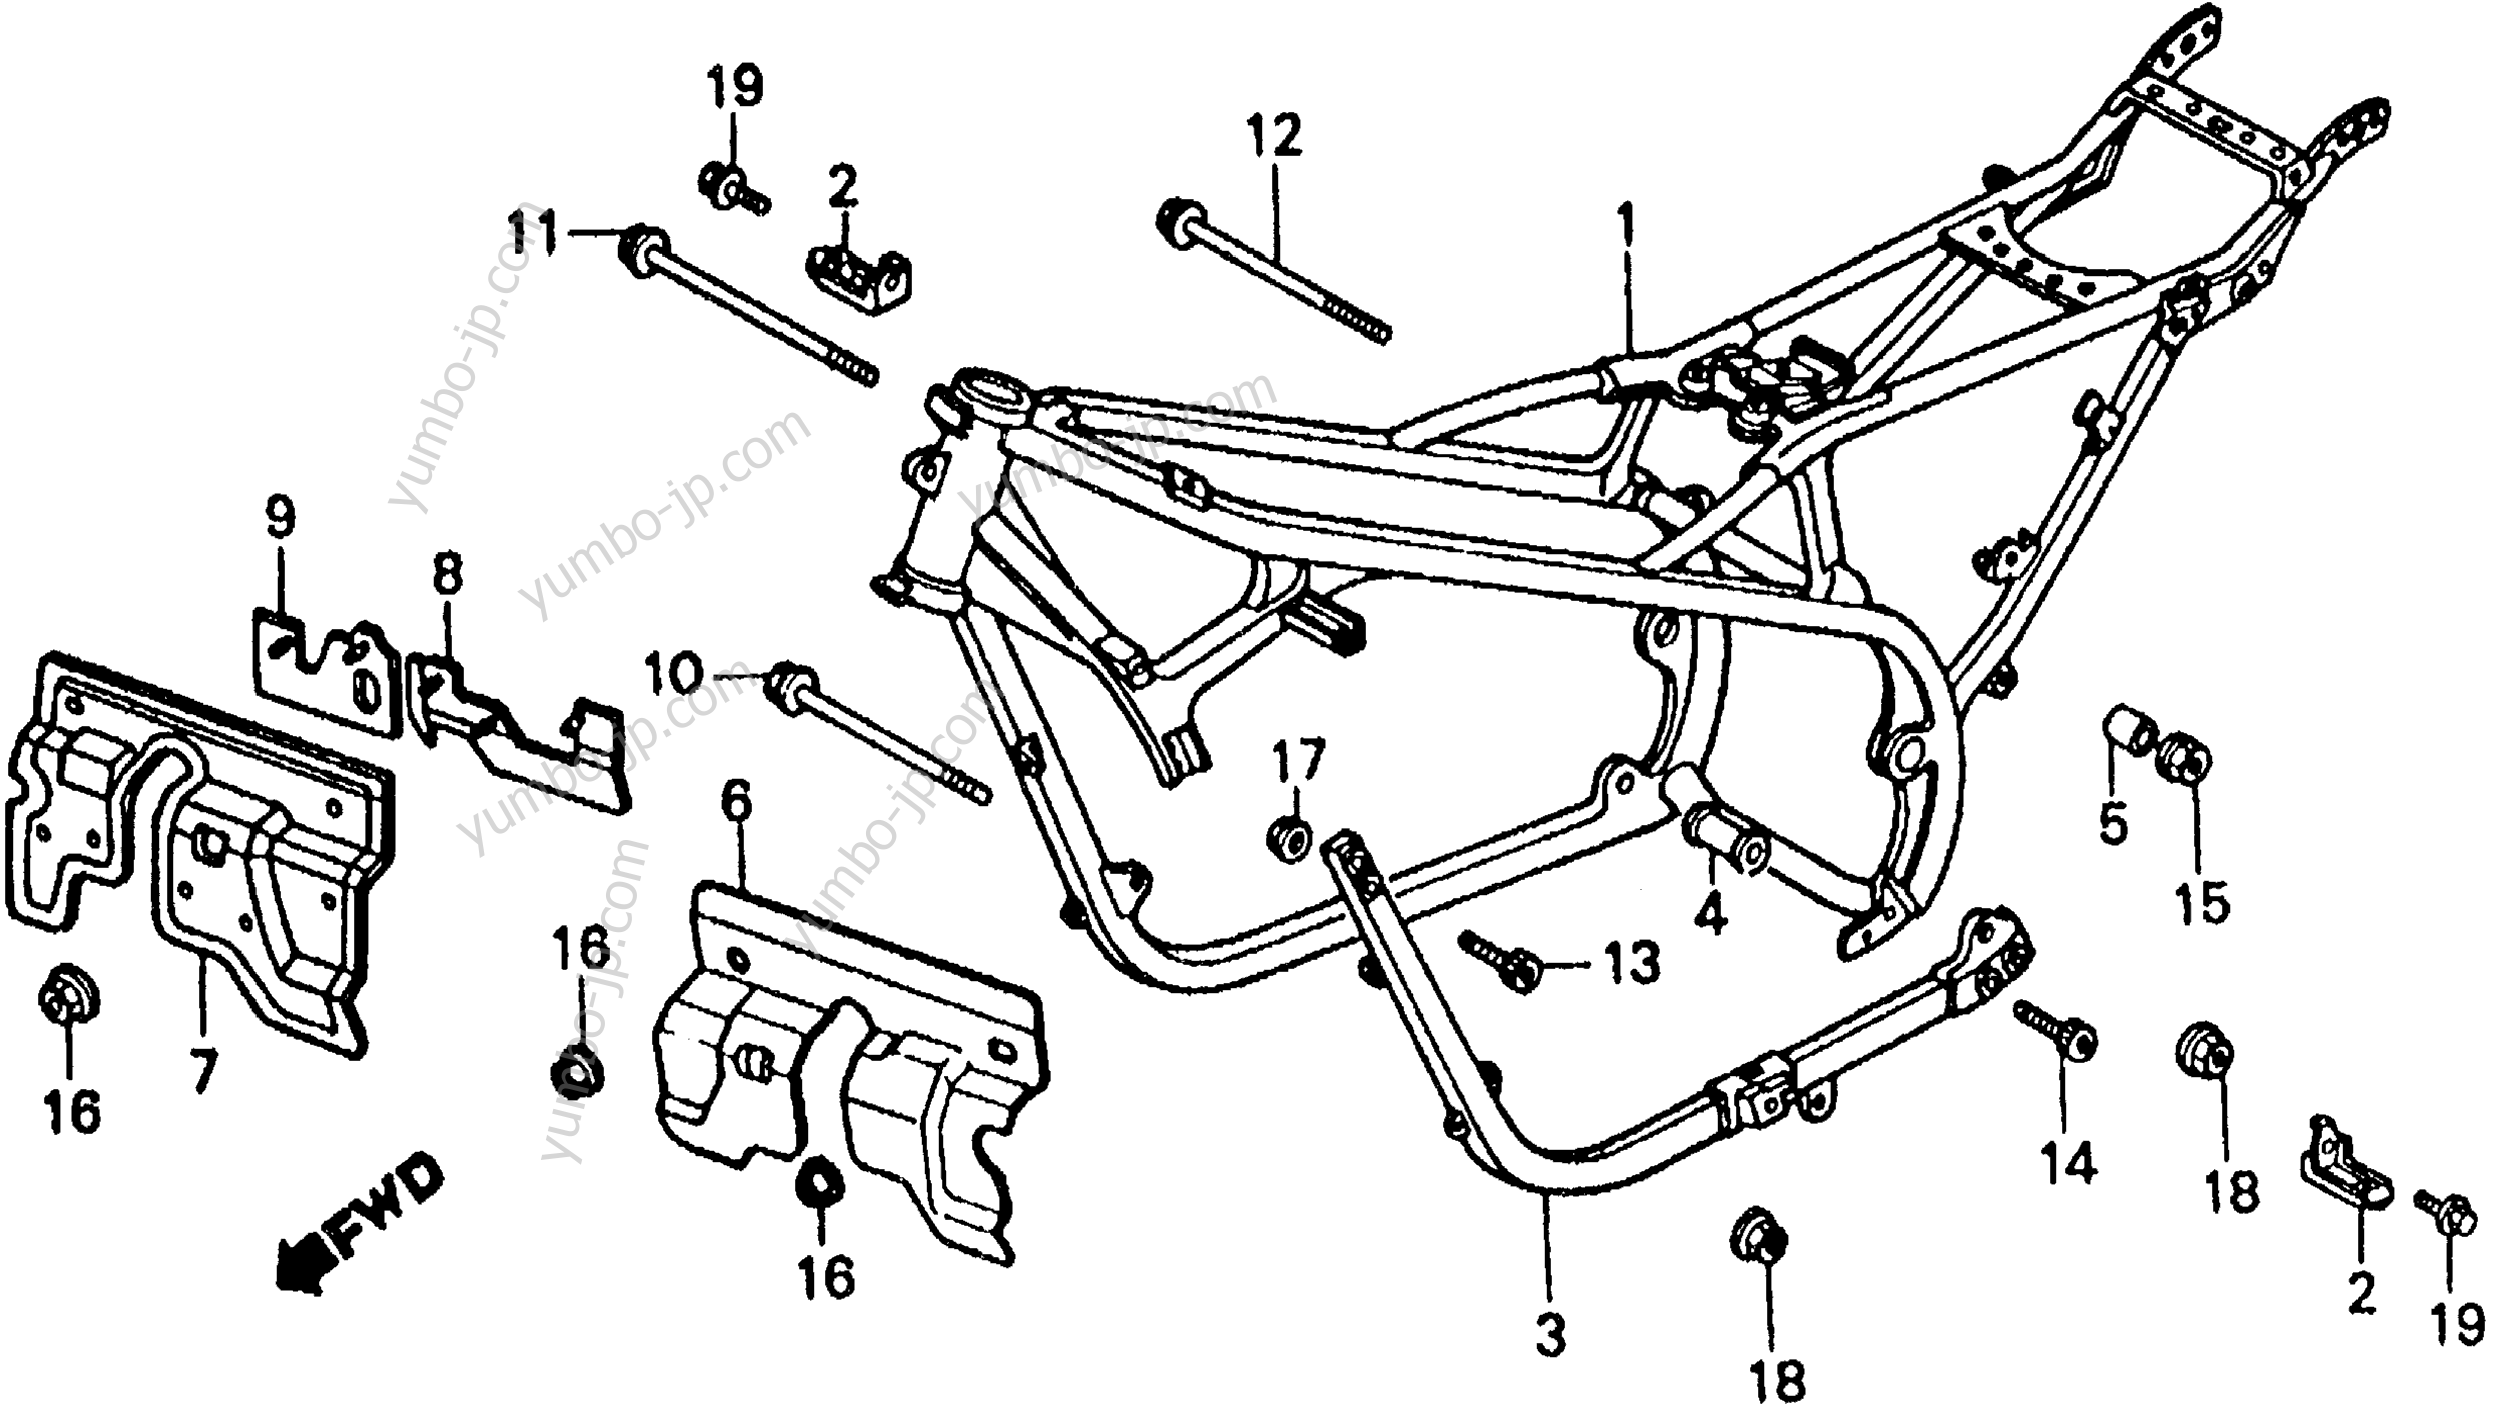 FRAME for motorcycles HONDA VF500F AC 1985 year